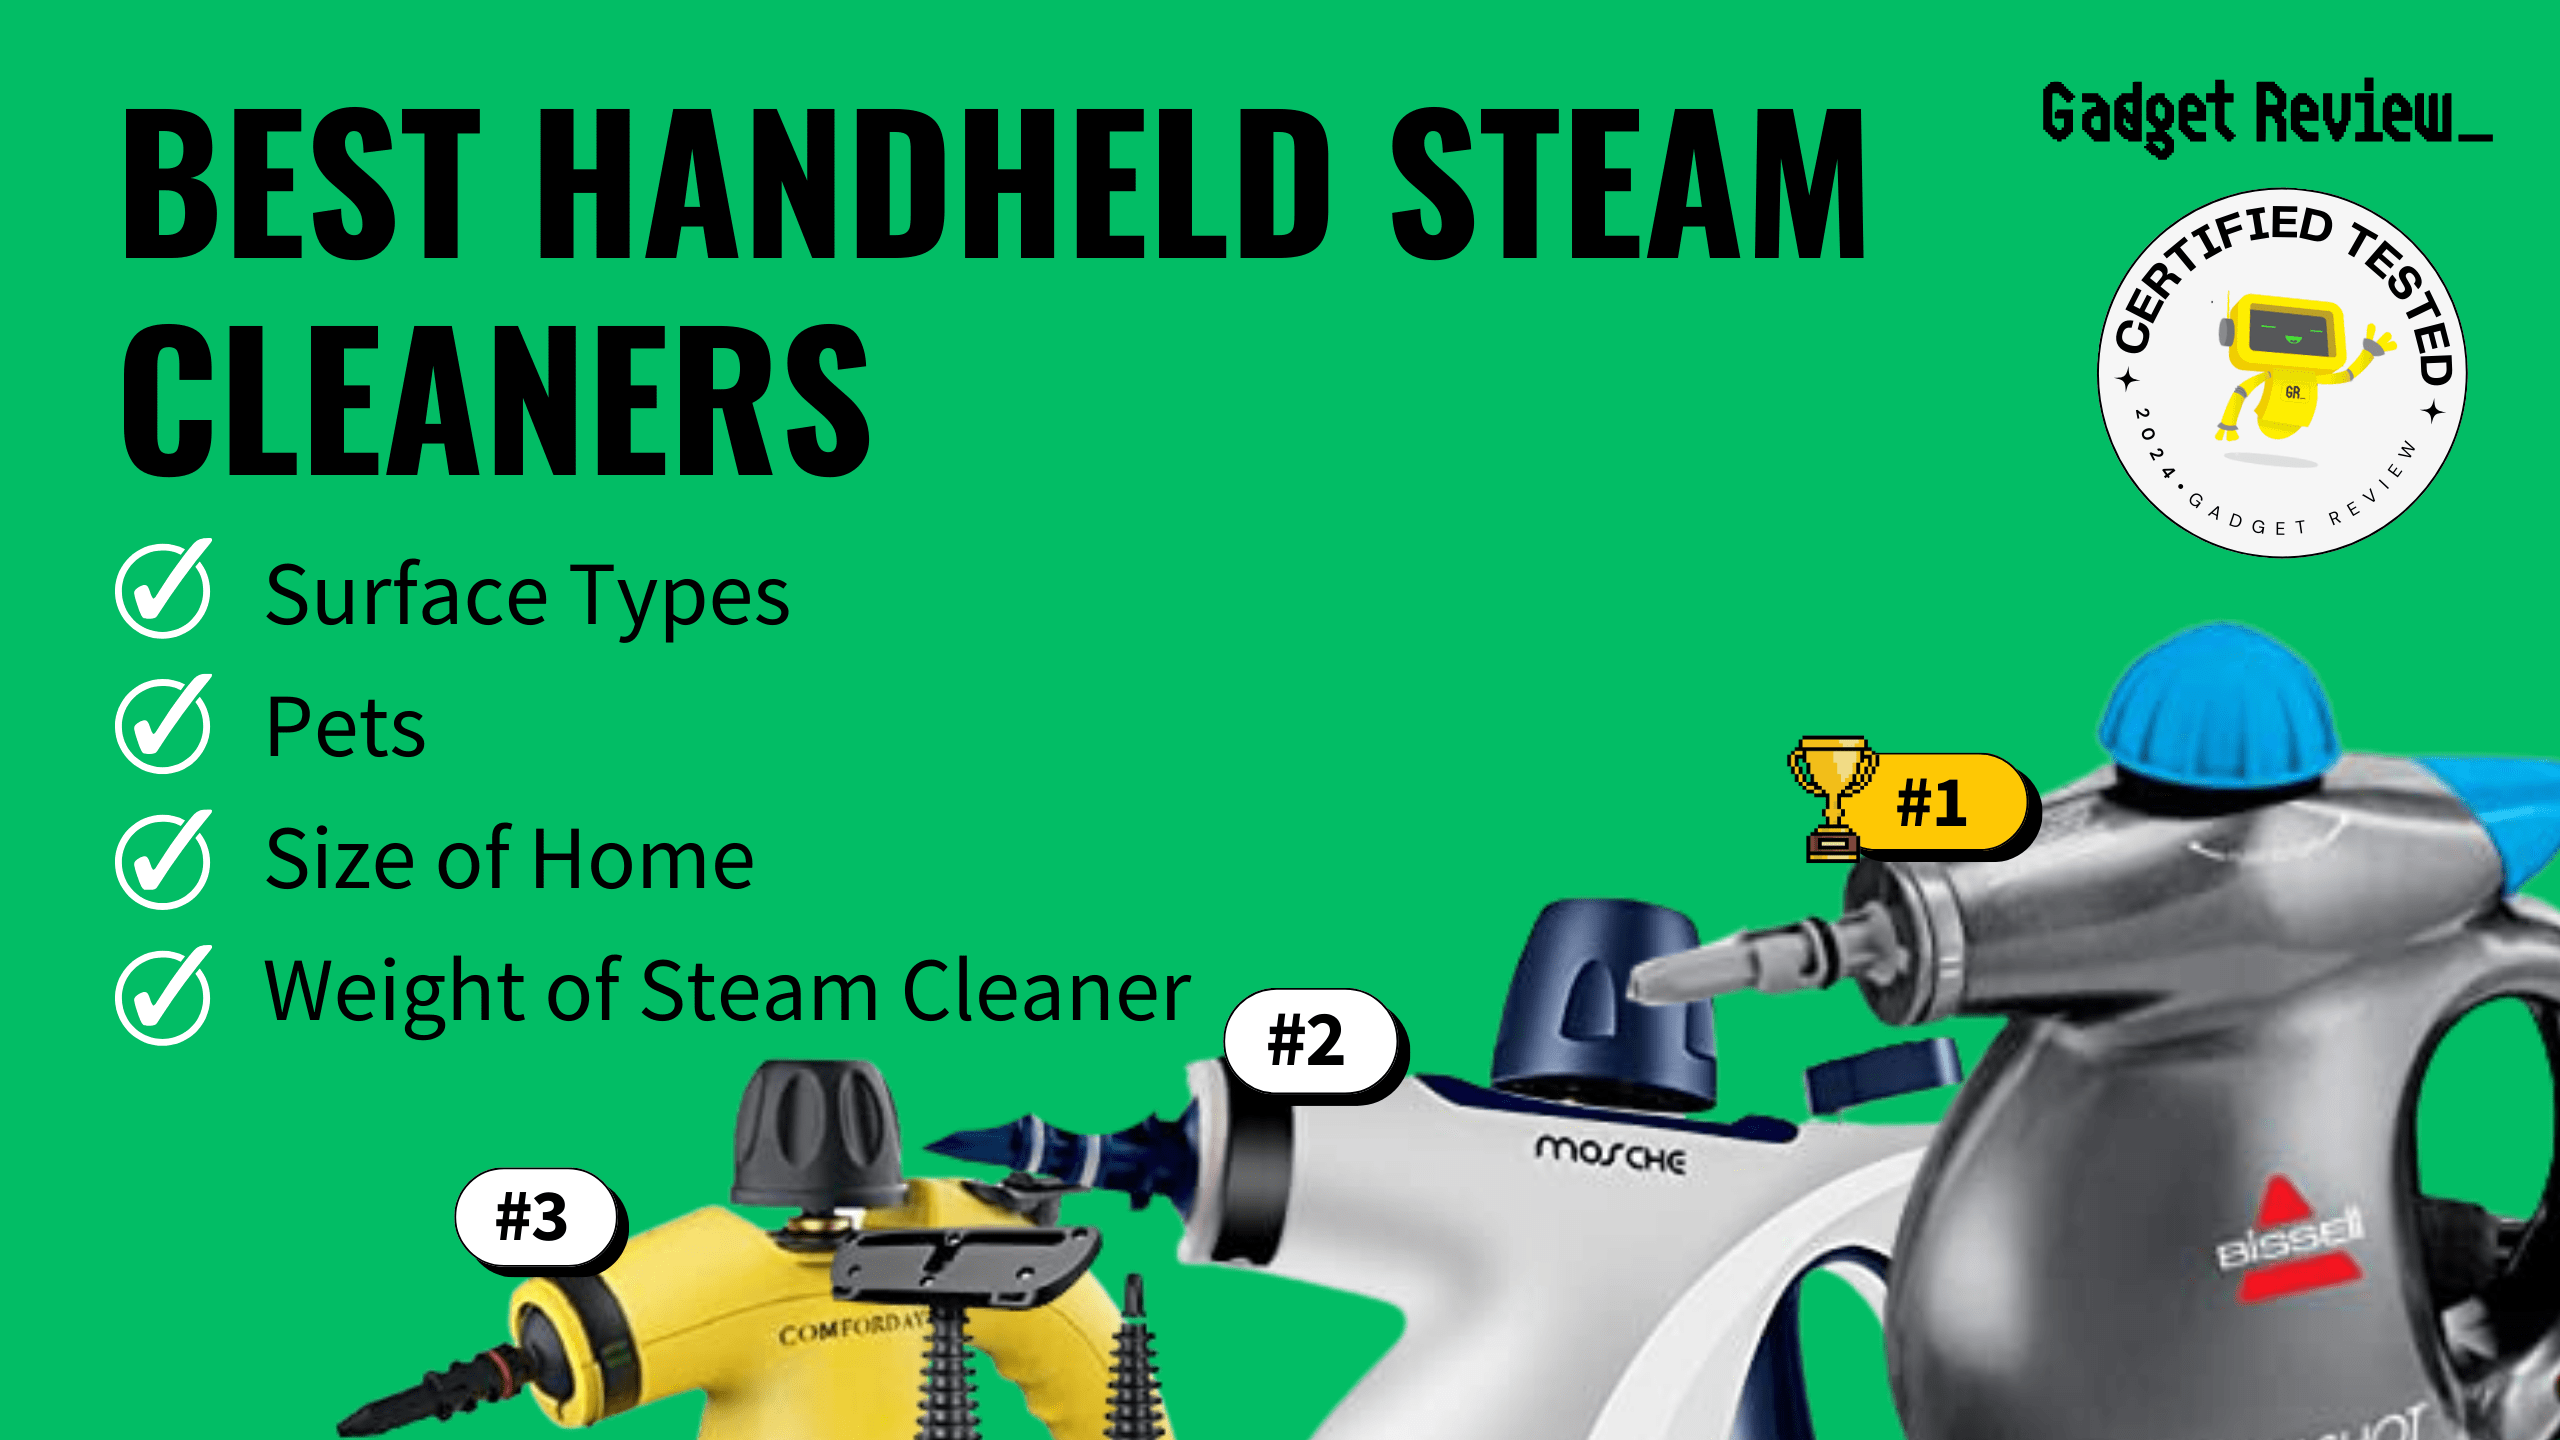 best handheld steam cleaner guide that shows the top best vacuum cleaner model